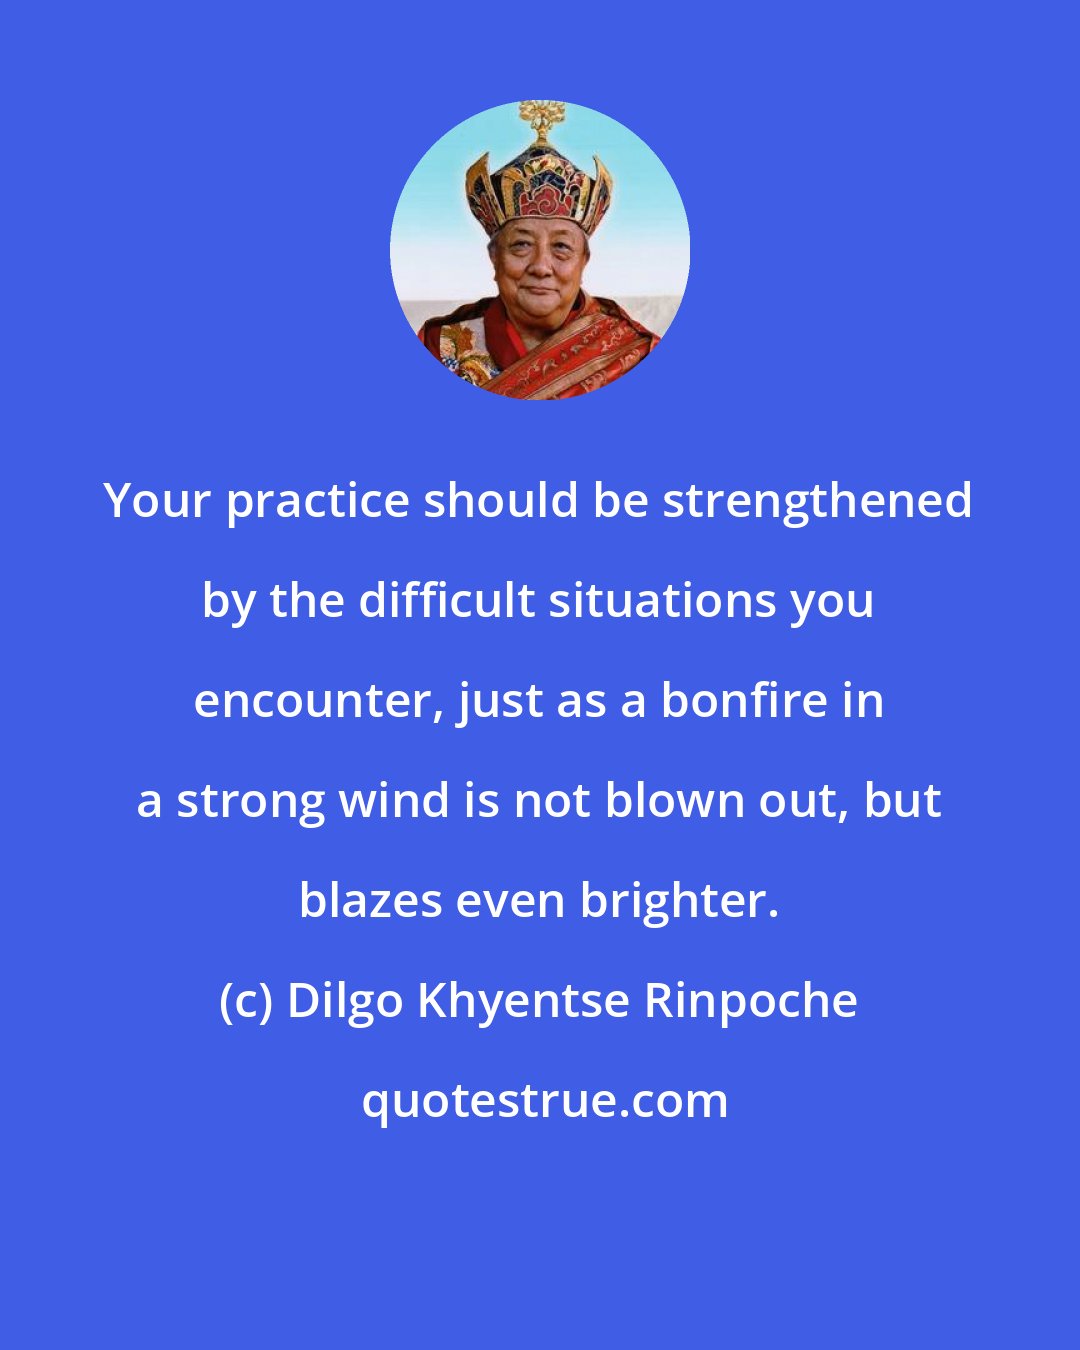 Dilgo Khyentse Rinpoche: Your practice should be strengthened by the difficult situations you encounter, just as a bonfire in a strong wind is not blown out, but blazes even brighter.